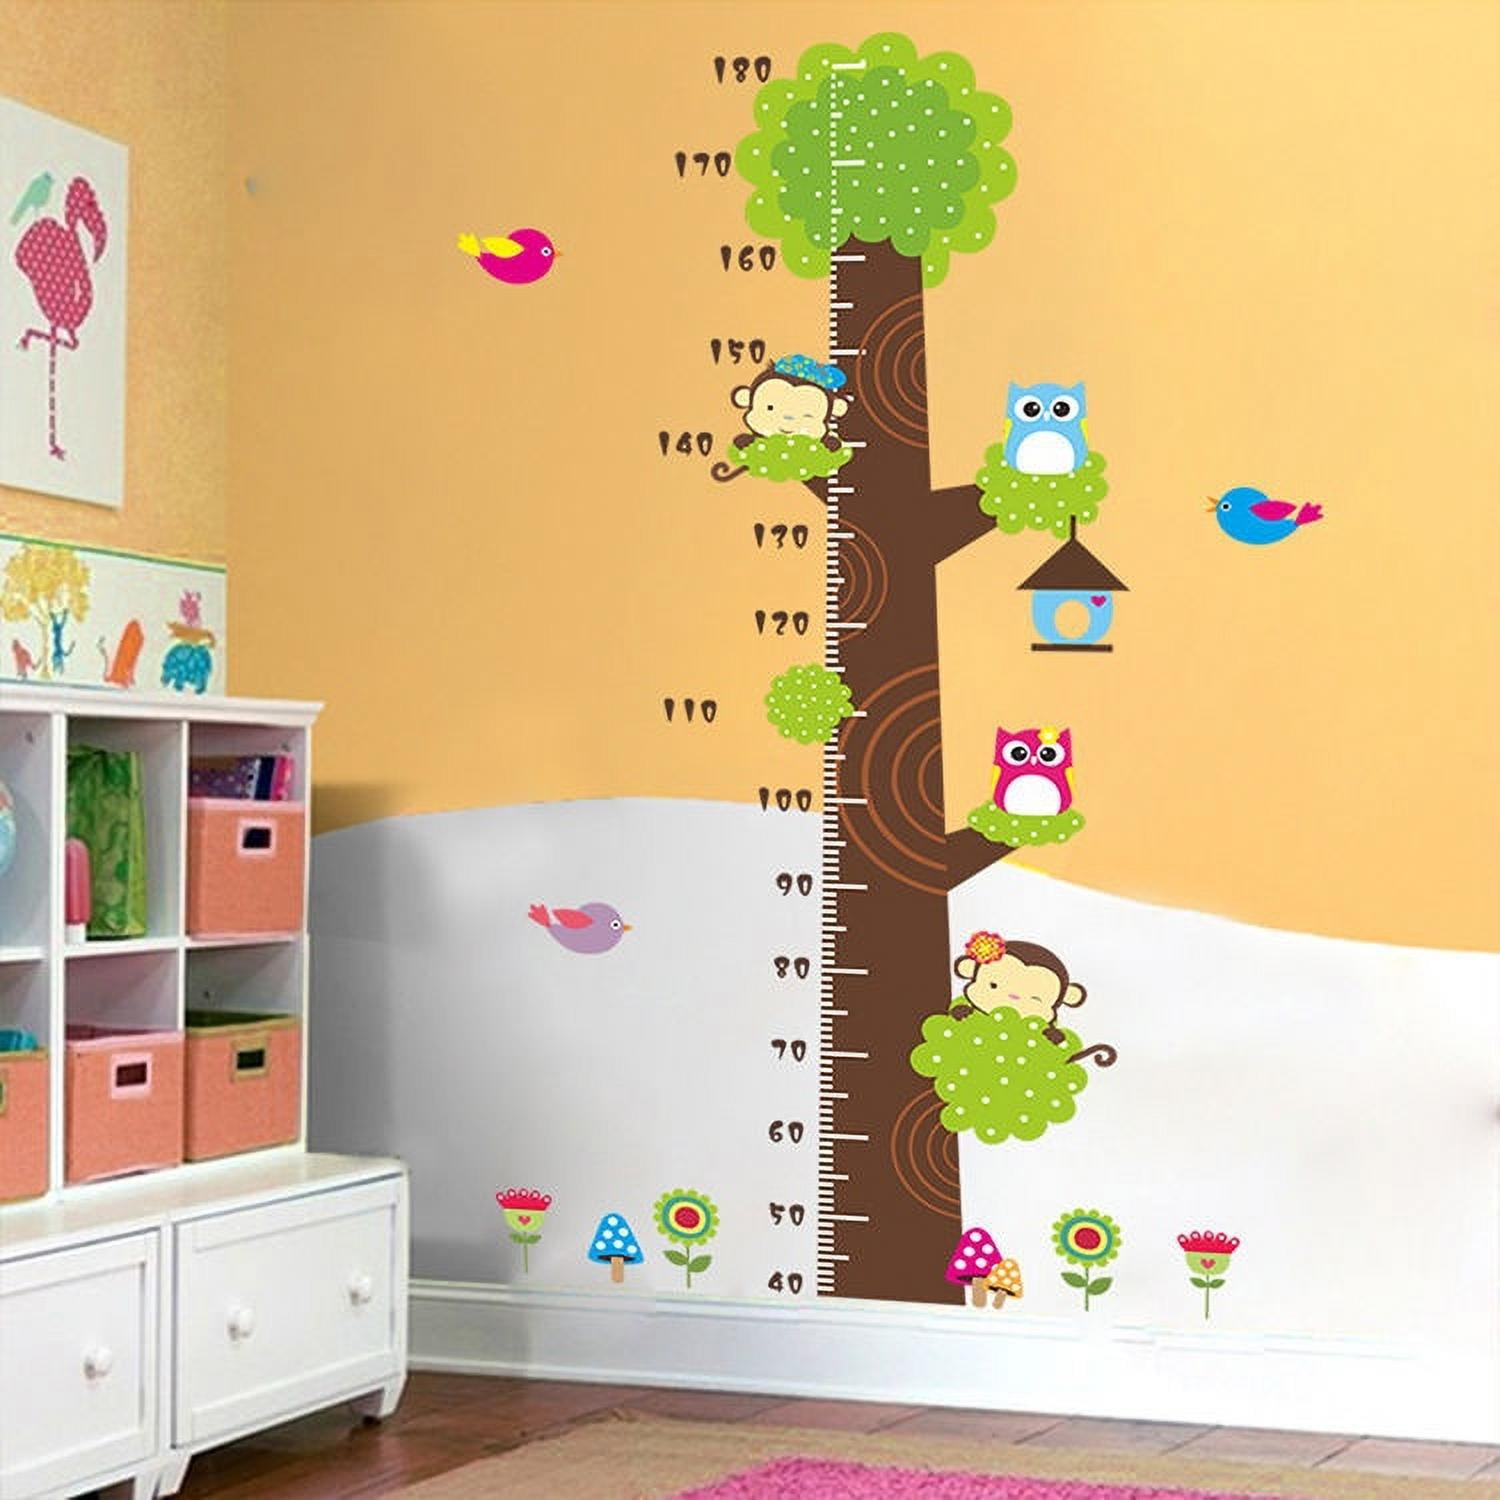 Winnie the pooh Height Chart Wall Sticker Kid Room Decor Nursery Decal Removable 